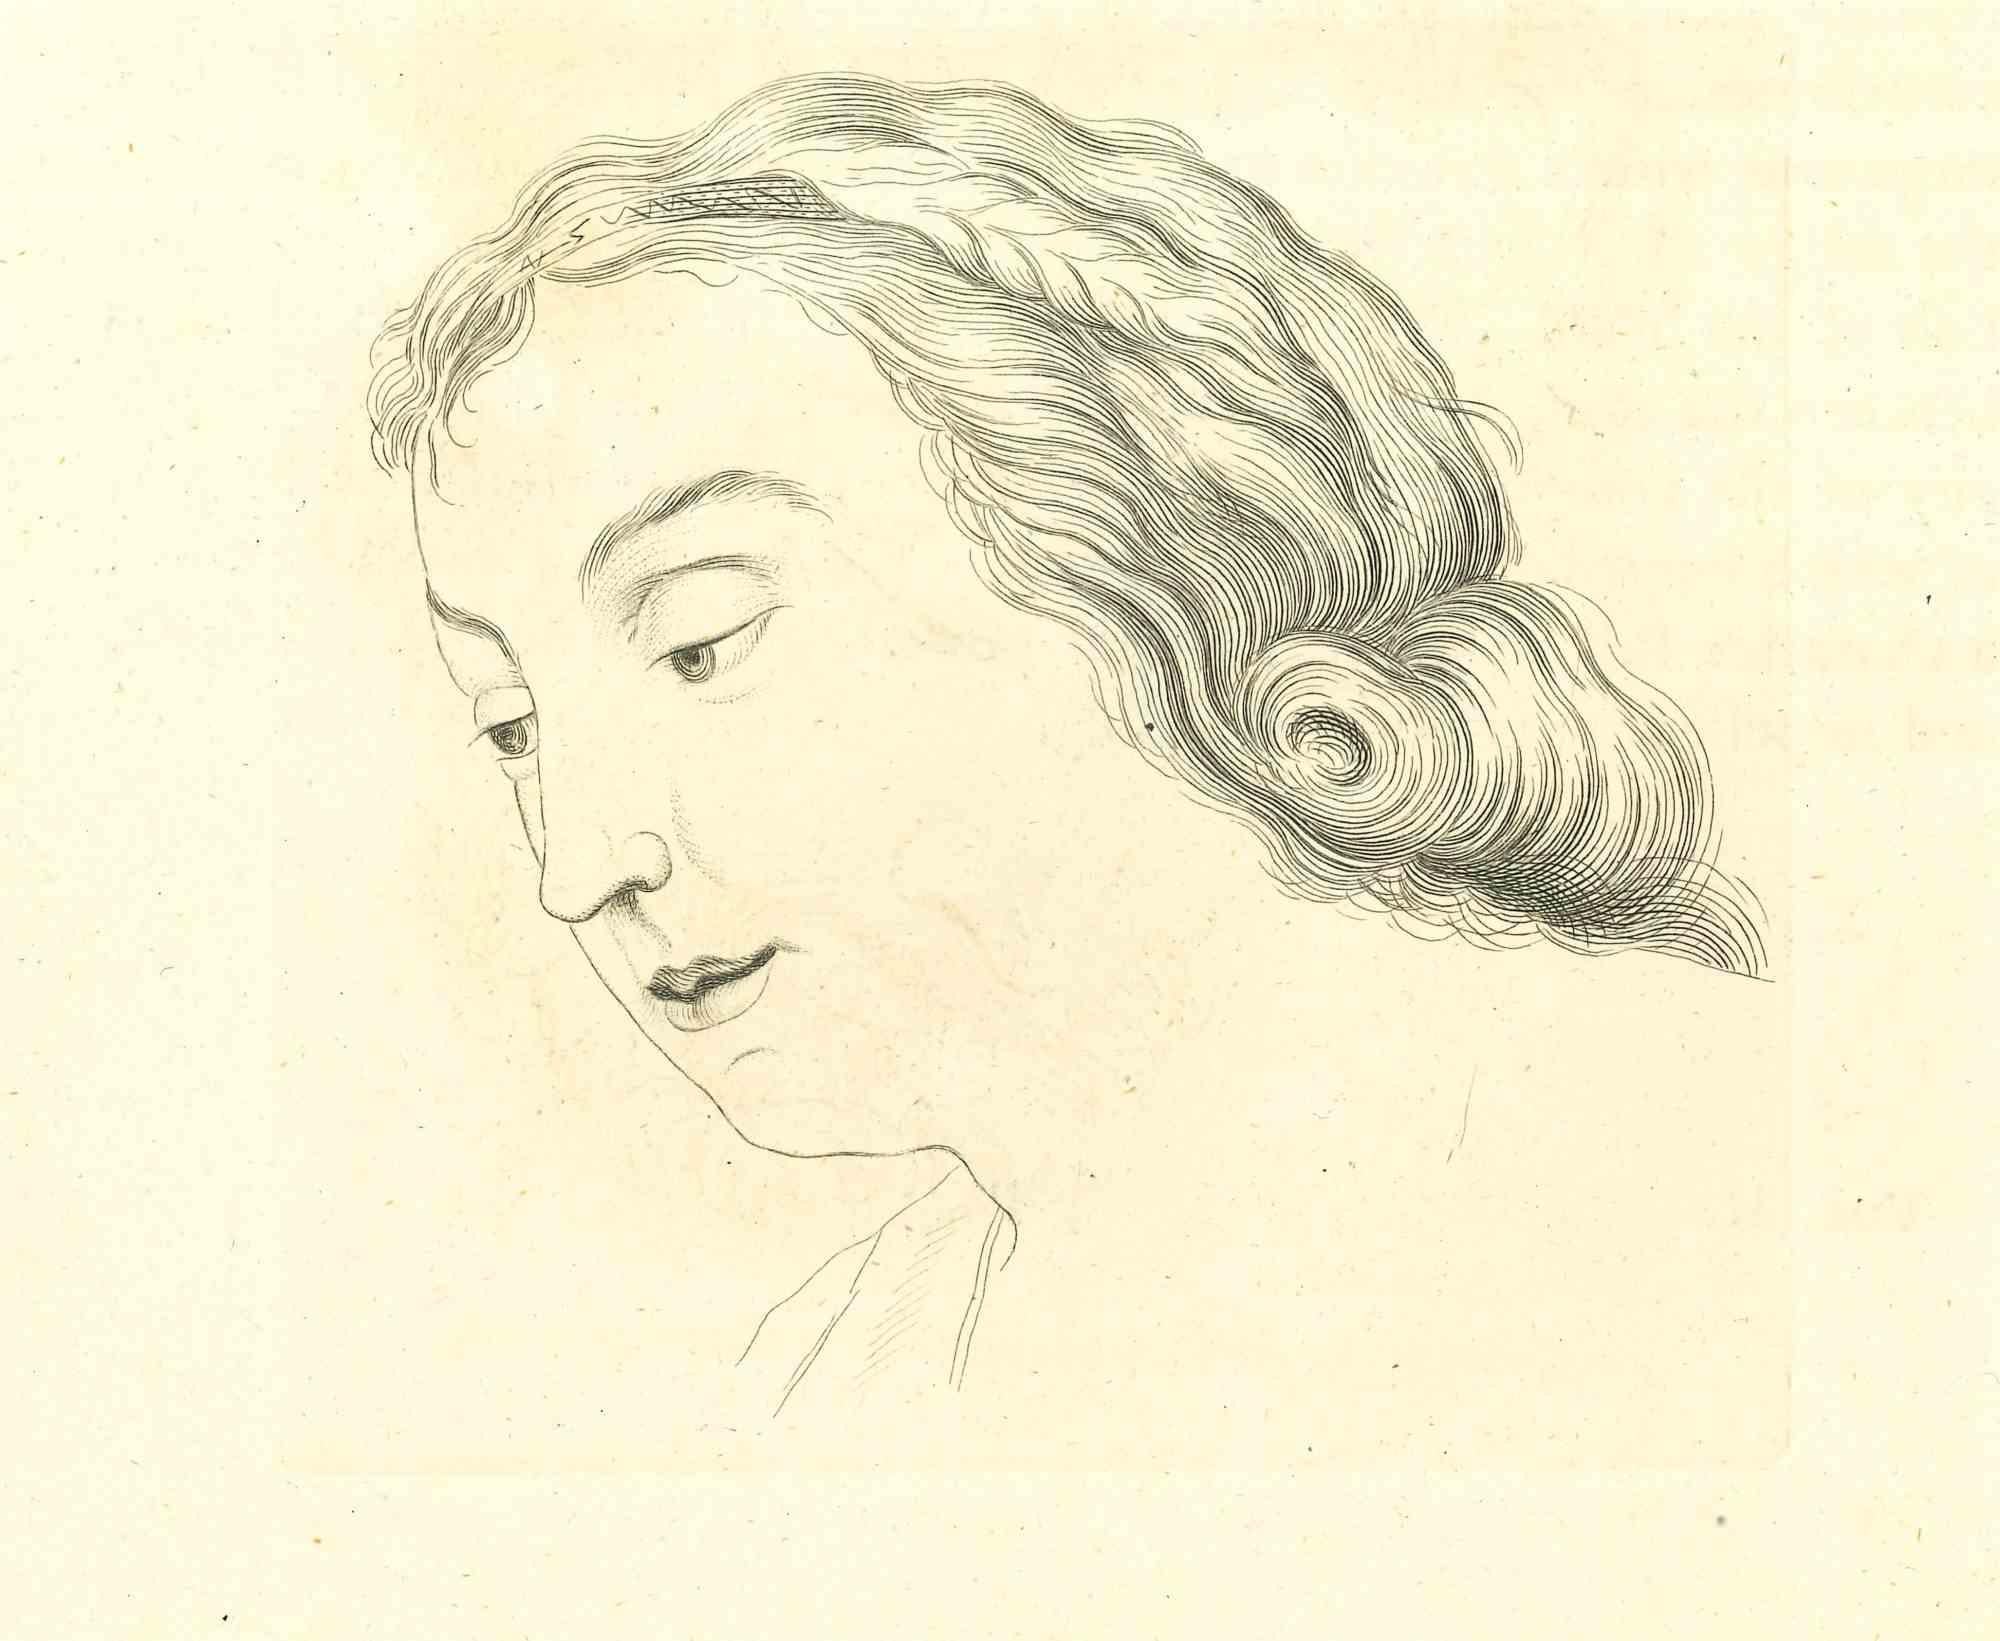 he Portrait Of a Young Woman is an original etching artwork realized by Thomas Holloway for Johann Caspar Lavater's "Essays on Physiognomy, Designed to Promote the Knowledge and the Love of Mankind", London, Bensley, 1810. 

With the script on the